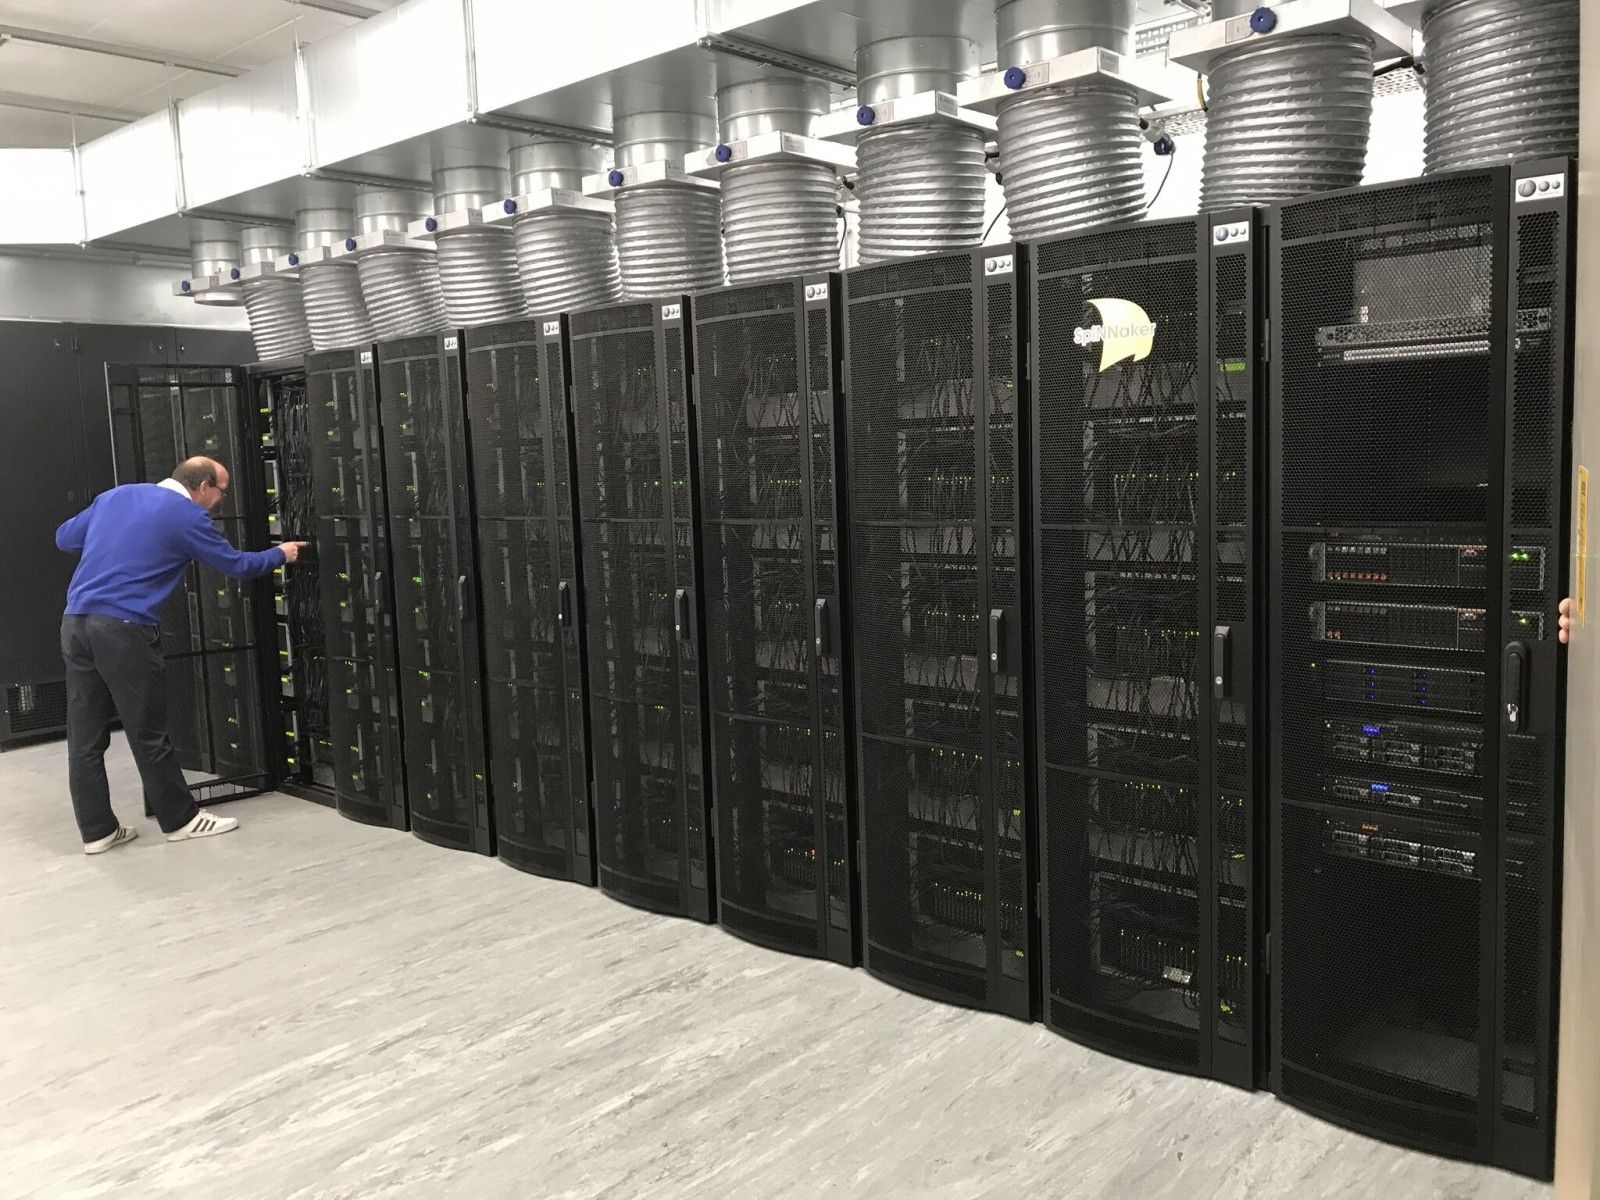 Launched the largest supercomputer that simulates the human brain